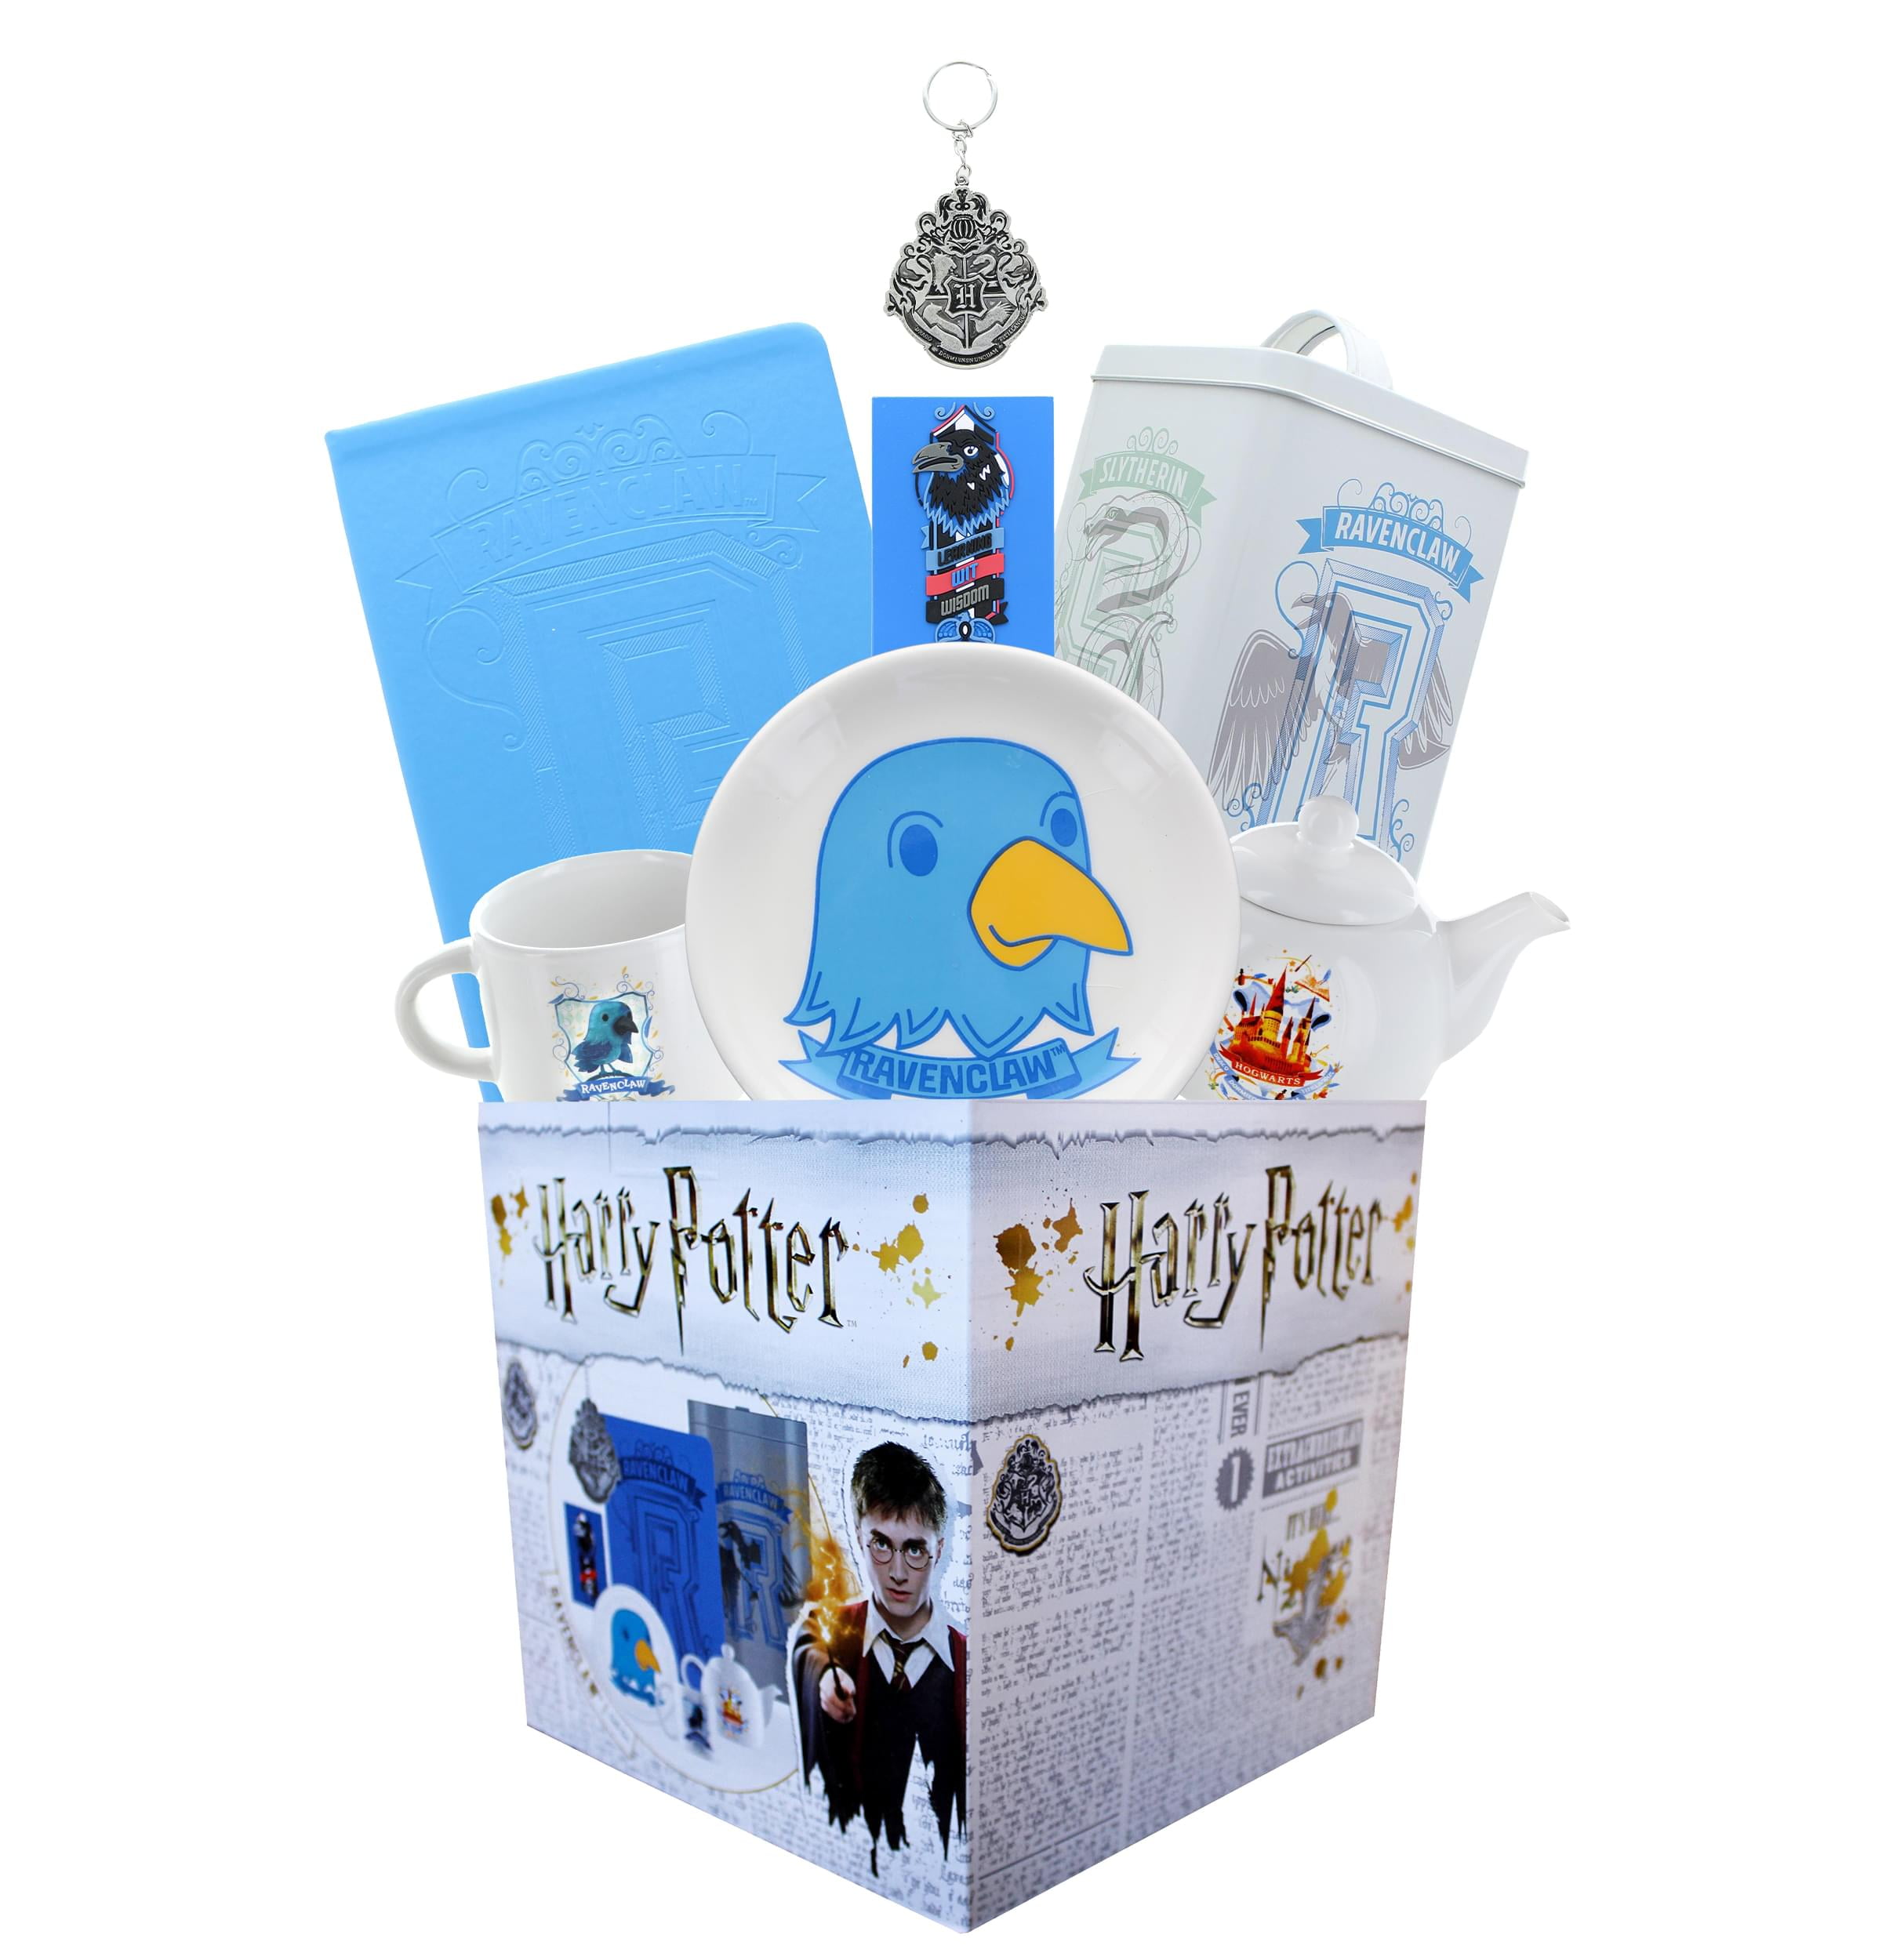 Harry Potter Favor bags, party favors, Goodie Bags,Party supplies SET OF 8